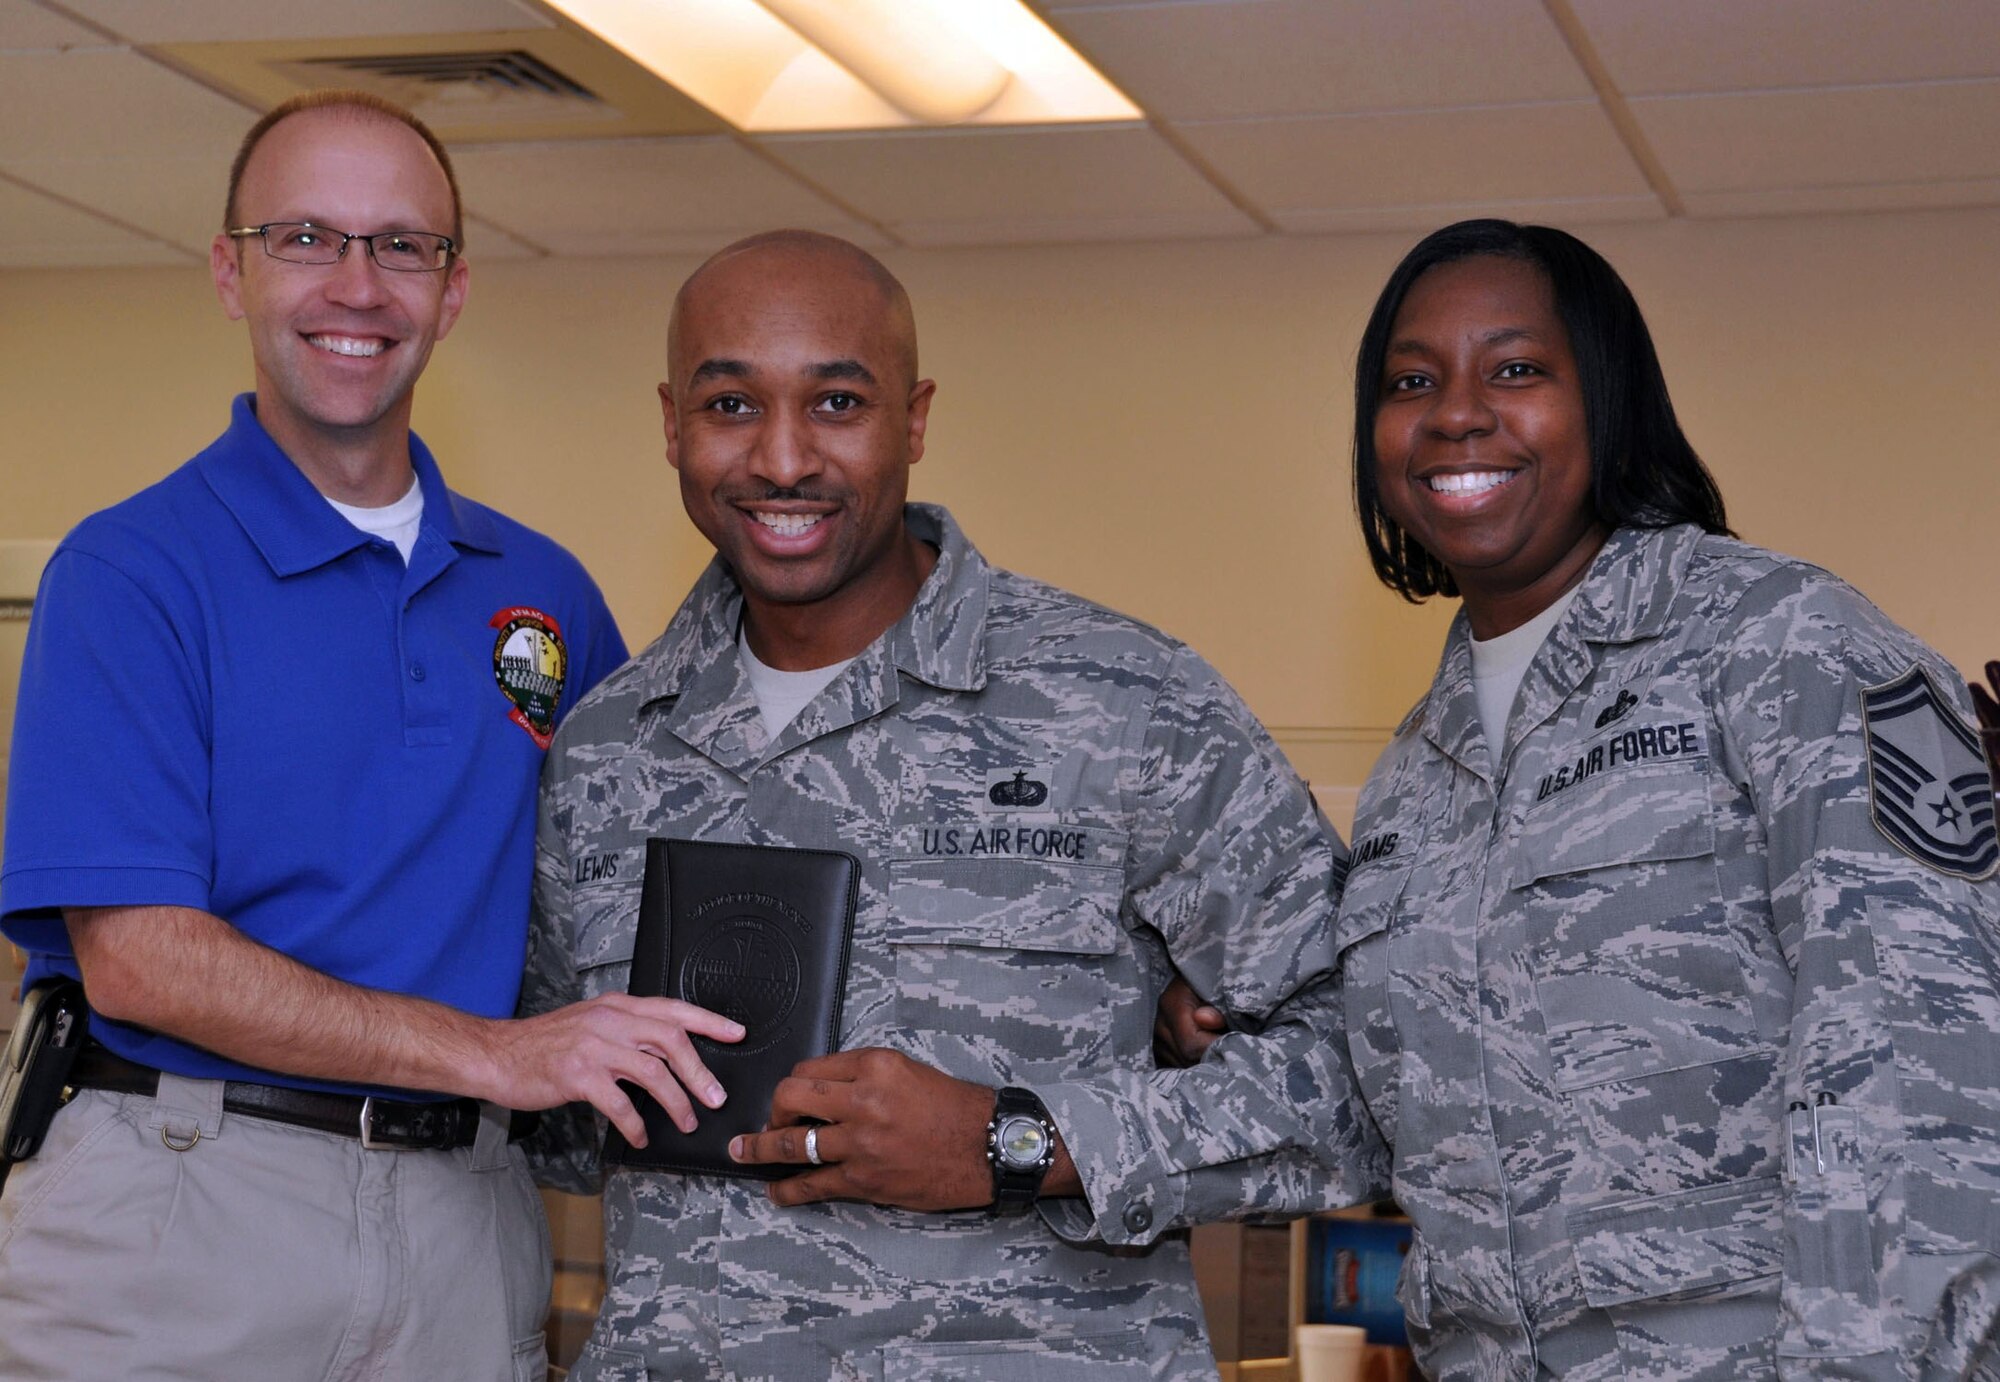 TRAVIS AIR FORCE BASE, Calif. --Master Sgt. Ganell Lewis, center, 349th Memorial Affairs Squadron, was surprised by Mr. Trevor Dean and Senior Master Sgt. Michelle Williams, with Senior Noncommissioned Officer of the Month for October. Mr. Dean is the Deputy Commander, and Sergeant Williams is a director of operations for the Air Force Mortuary Affairs Operations Center, Dover AFB, Del. Sergeant Lewis is deployed there with a team of reservists from the 349th MAS. (U.S. Air Force photo/Staff Sgt. Jamie George)